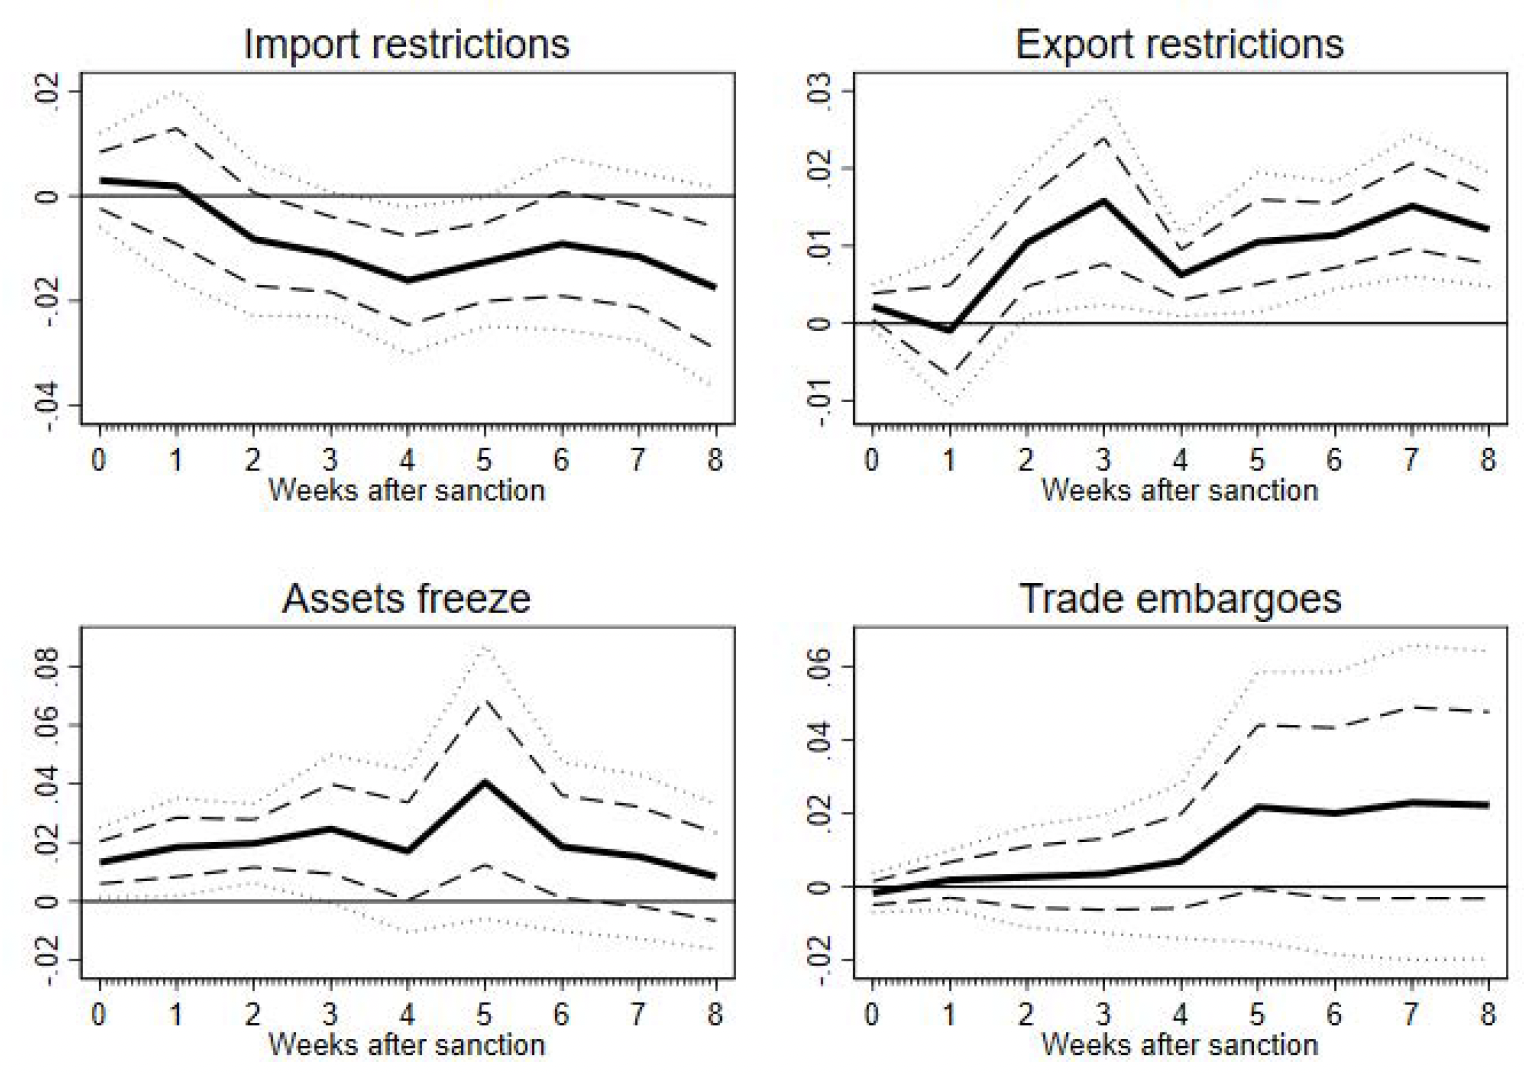 Figure 2 Dynamic estimates of the effects of economic sanctions on the exchange rate broken down by type